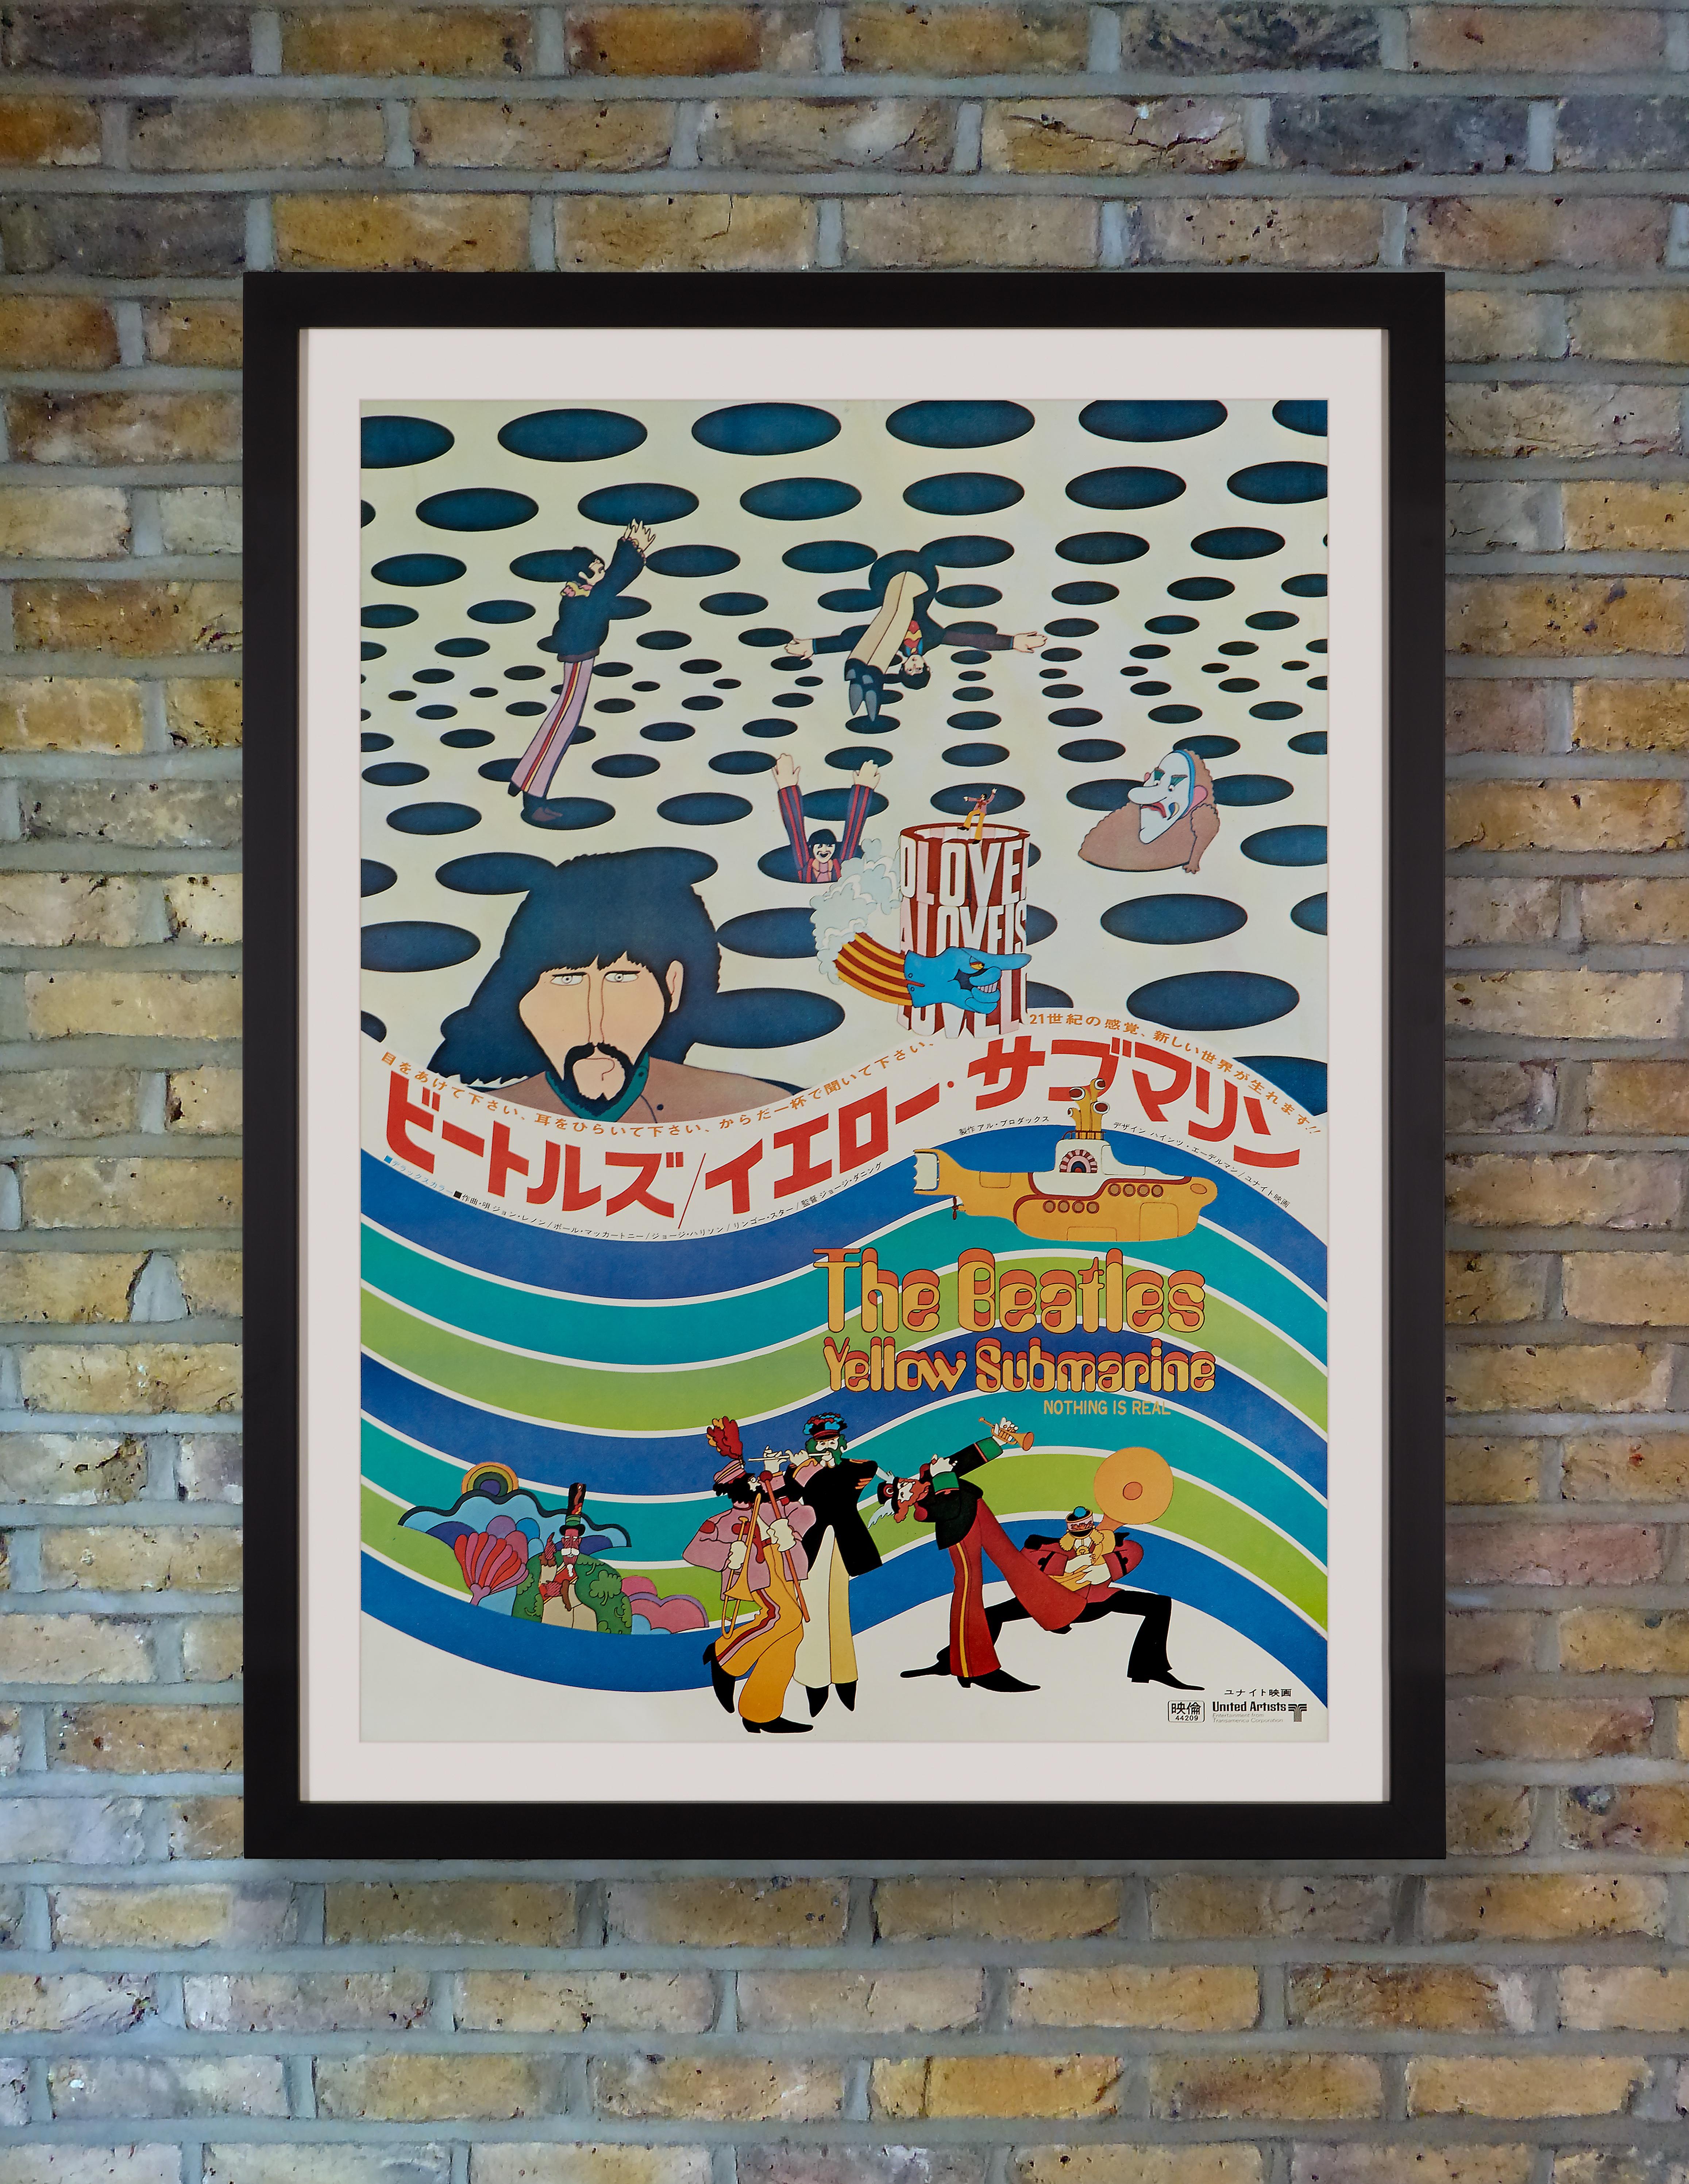 This fantastically bizarre Japanese B2 poster offers some of the best artwork created to promote The Beatles 1968 hit psychedelic musical animation 'Yellow Submarine,' with its optical illusions, lush visuals and colorful characters. Directed by